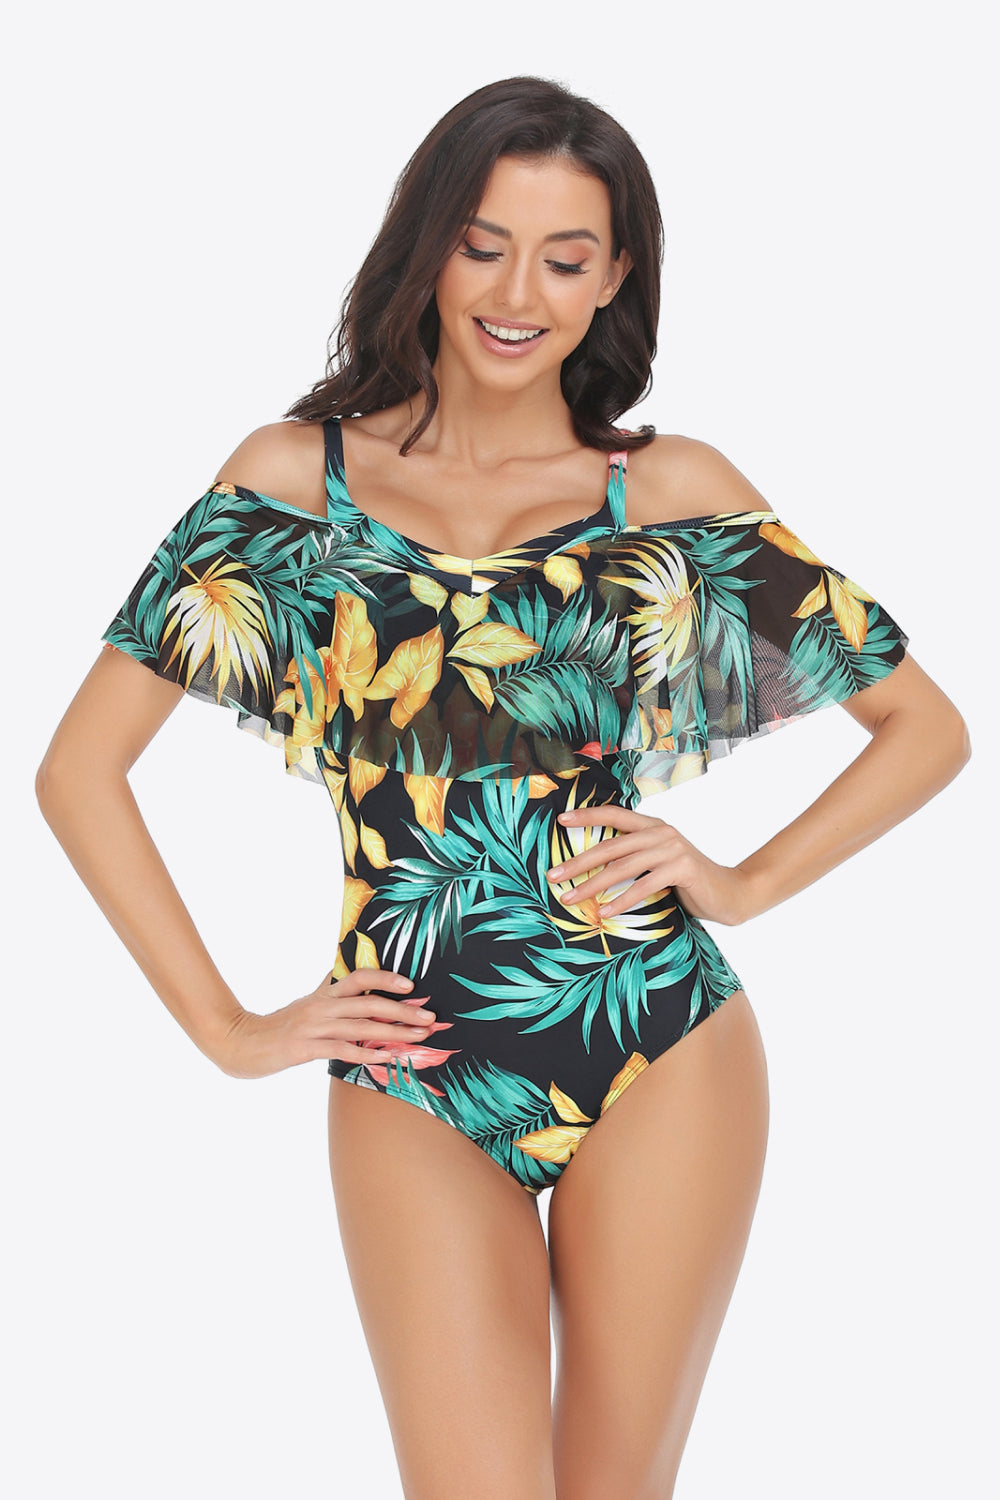 Botanical Print Cold-Shoulder Layered One-Piece Swimsuit - Green / S - Women’s Clothing & Accessories - Swimwear - 7